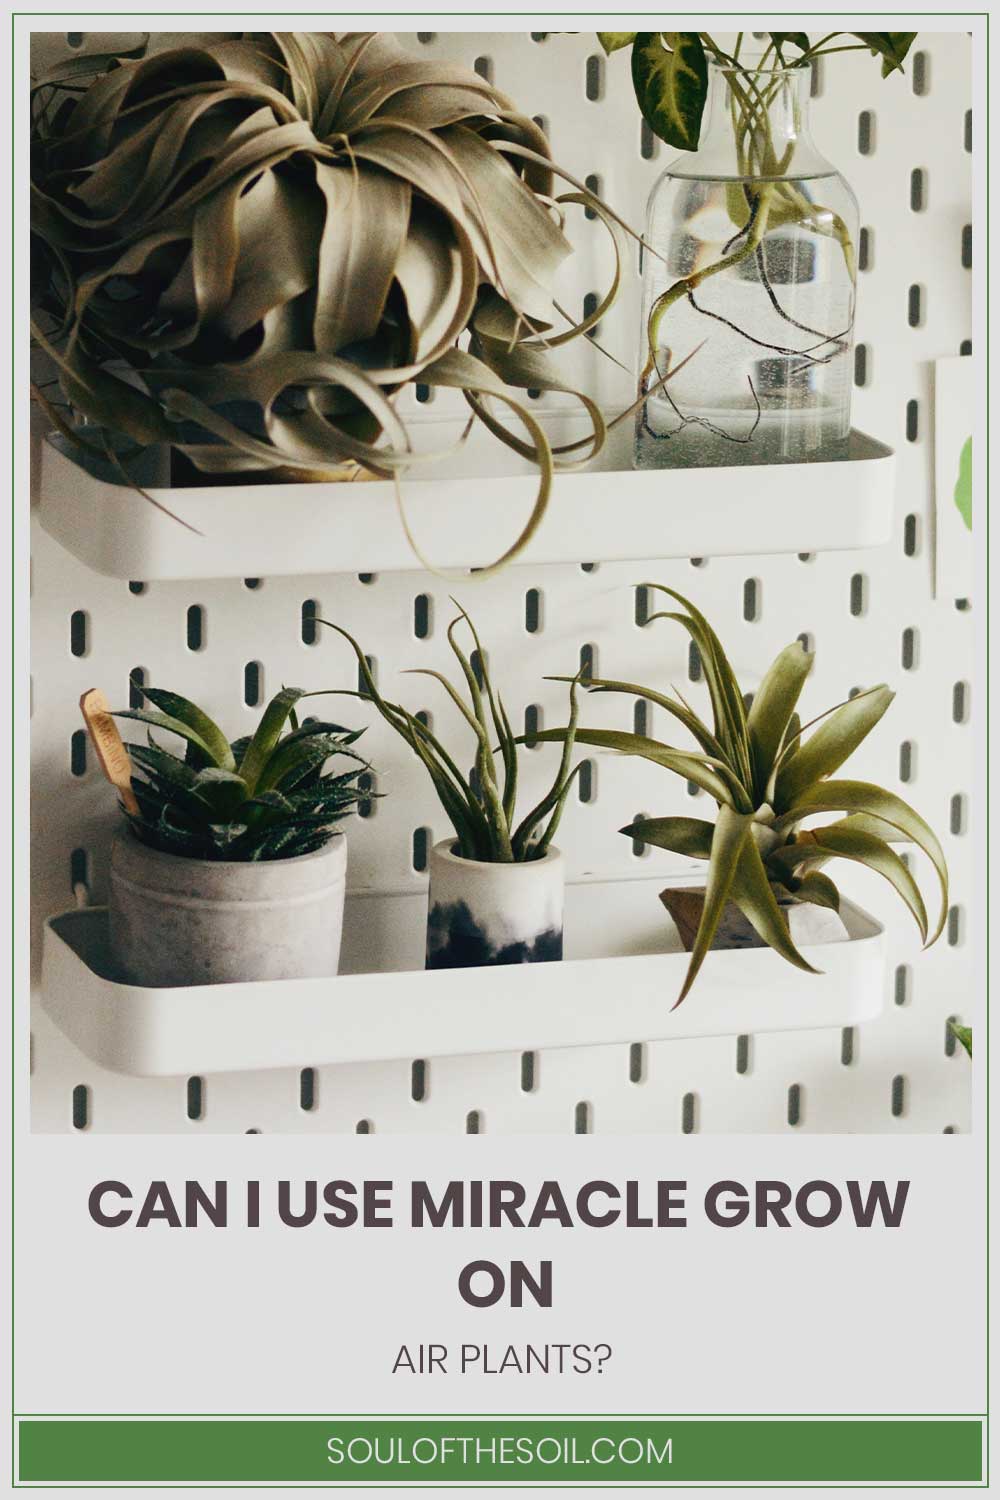 Can I Use Miracle Grow On Air Plants?